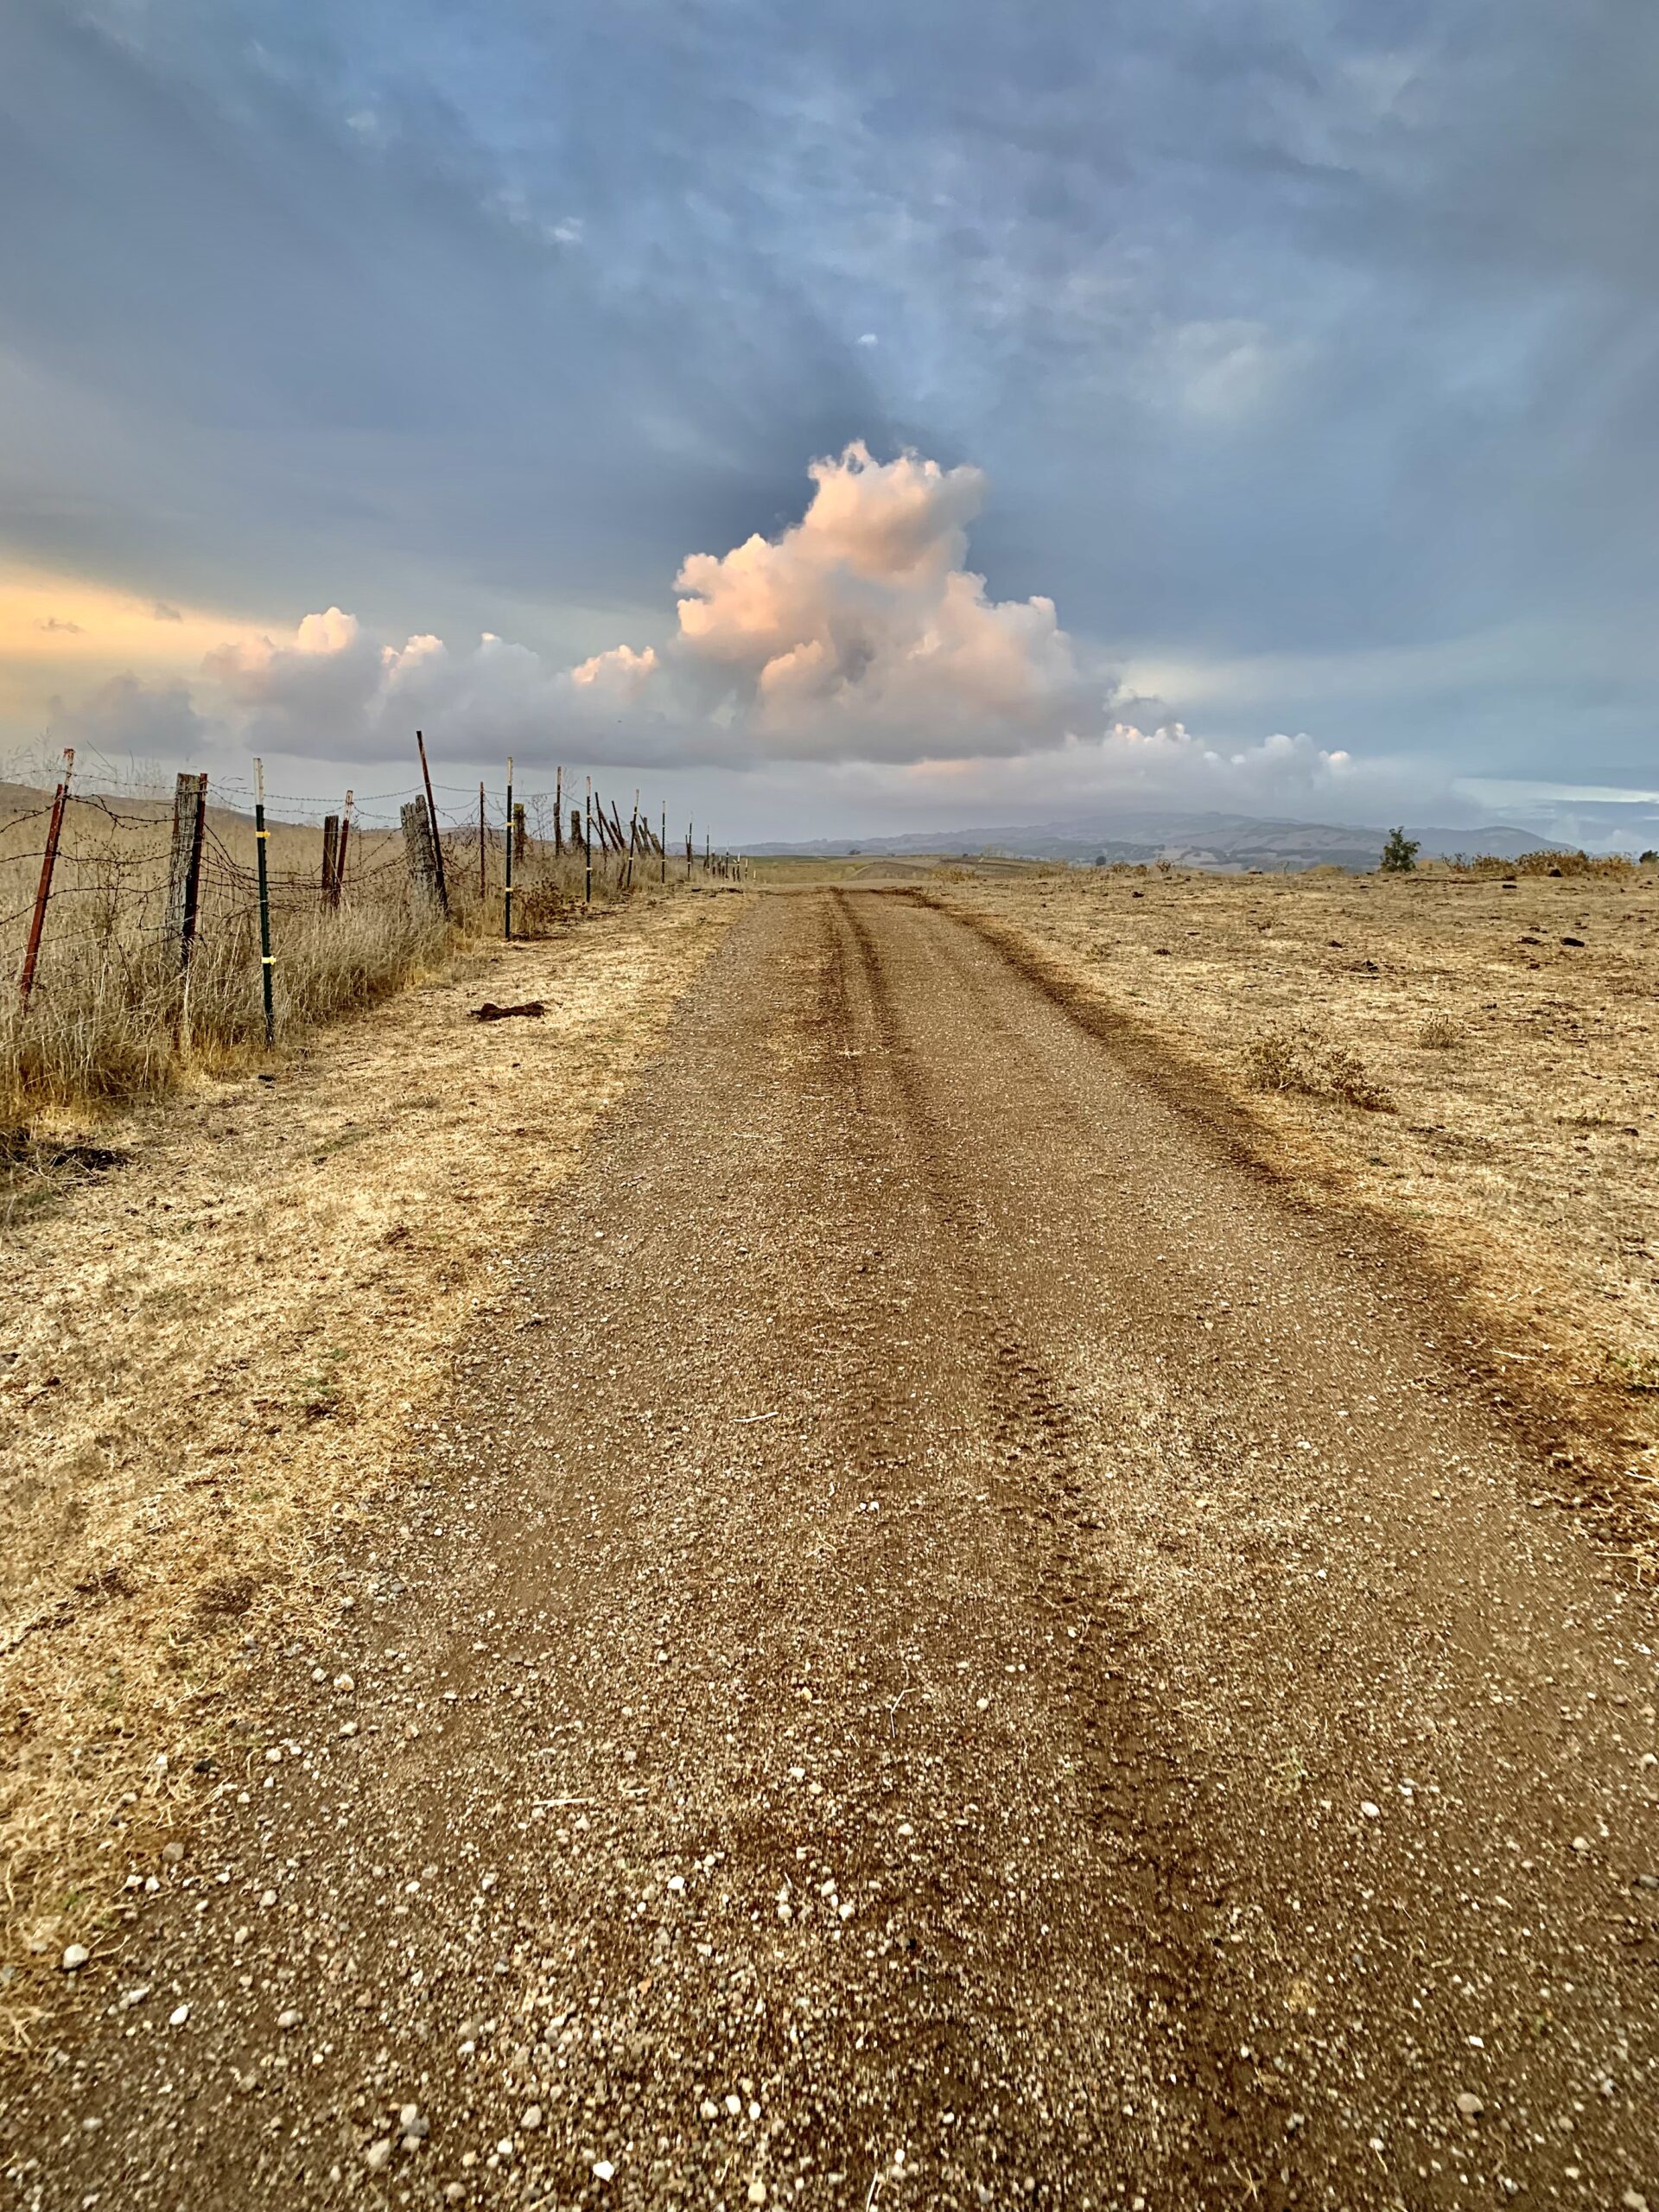 A dirt road in the middle of a field with clouds in the sky.